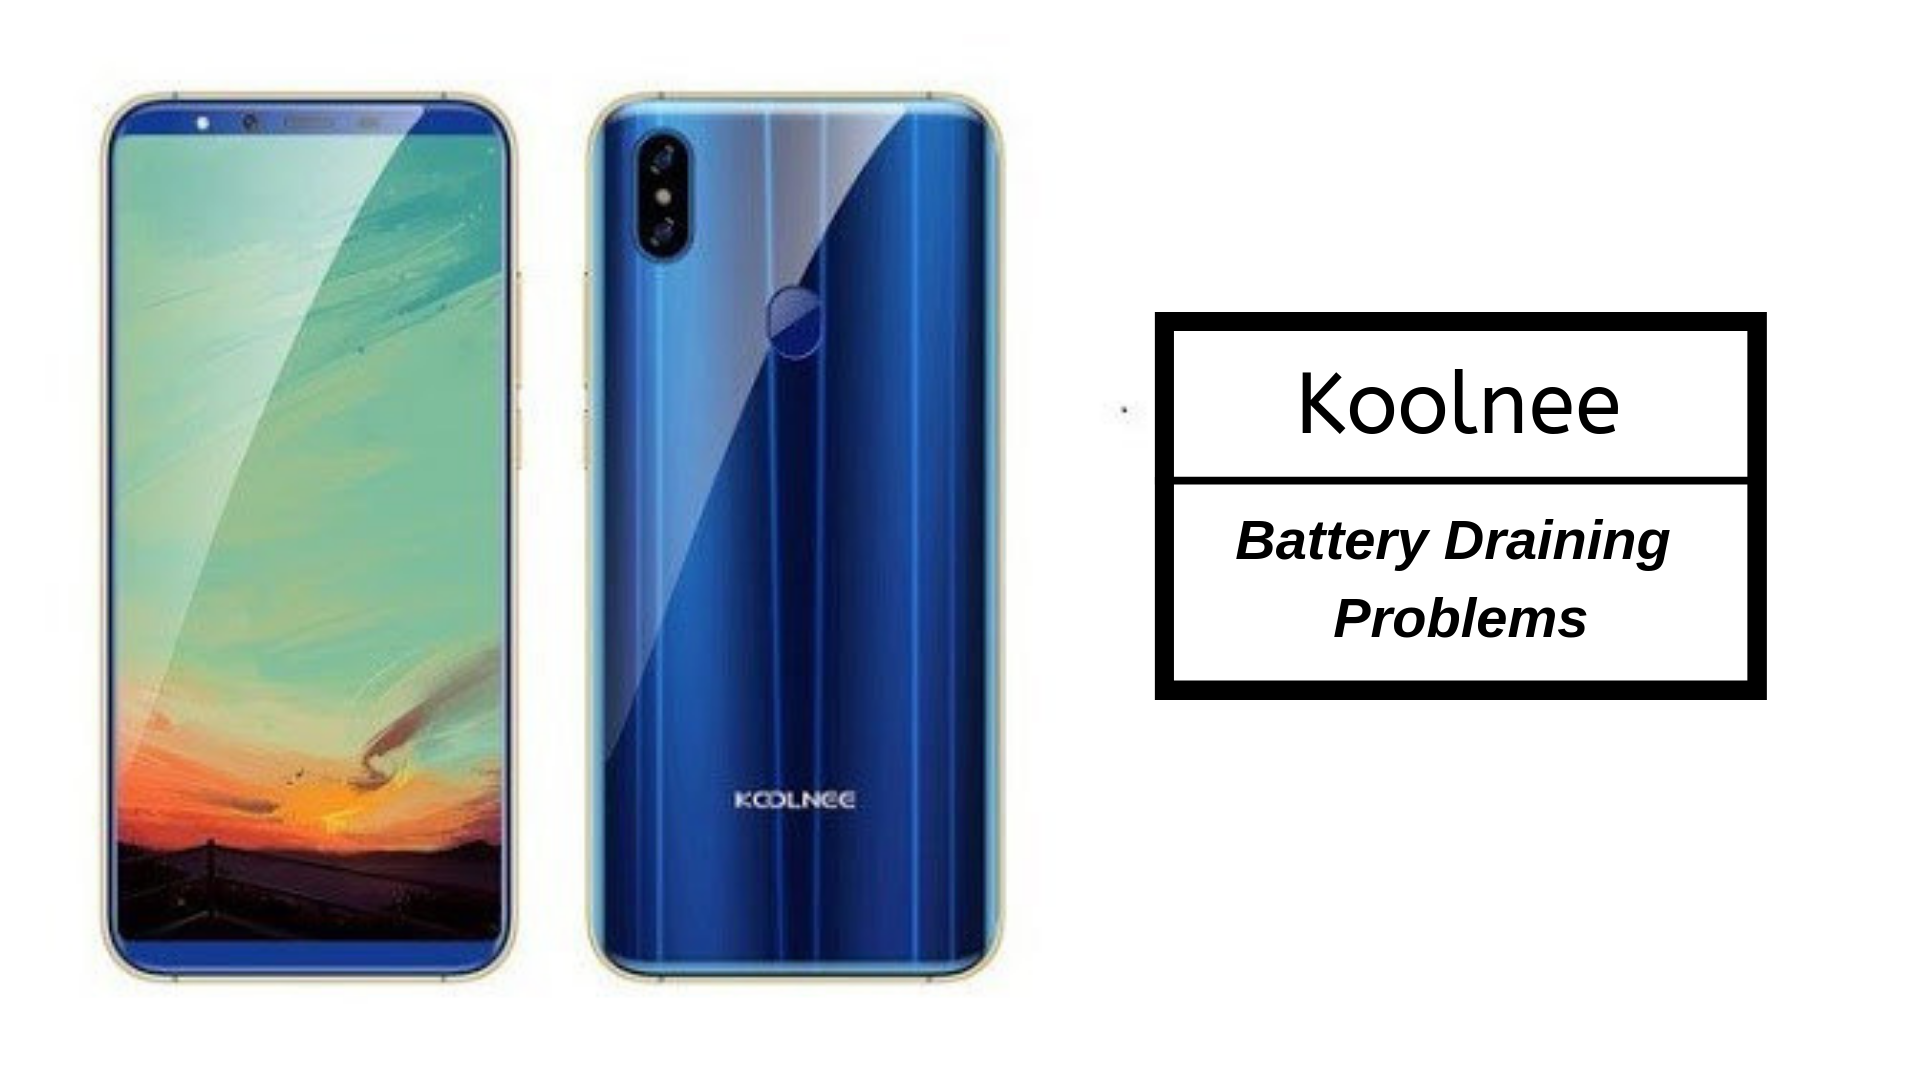 How Fix Koolnee Battery Draining Problems - Troubleshooting and Fixes